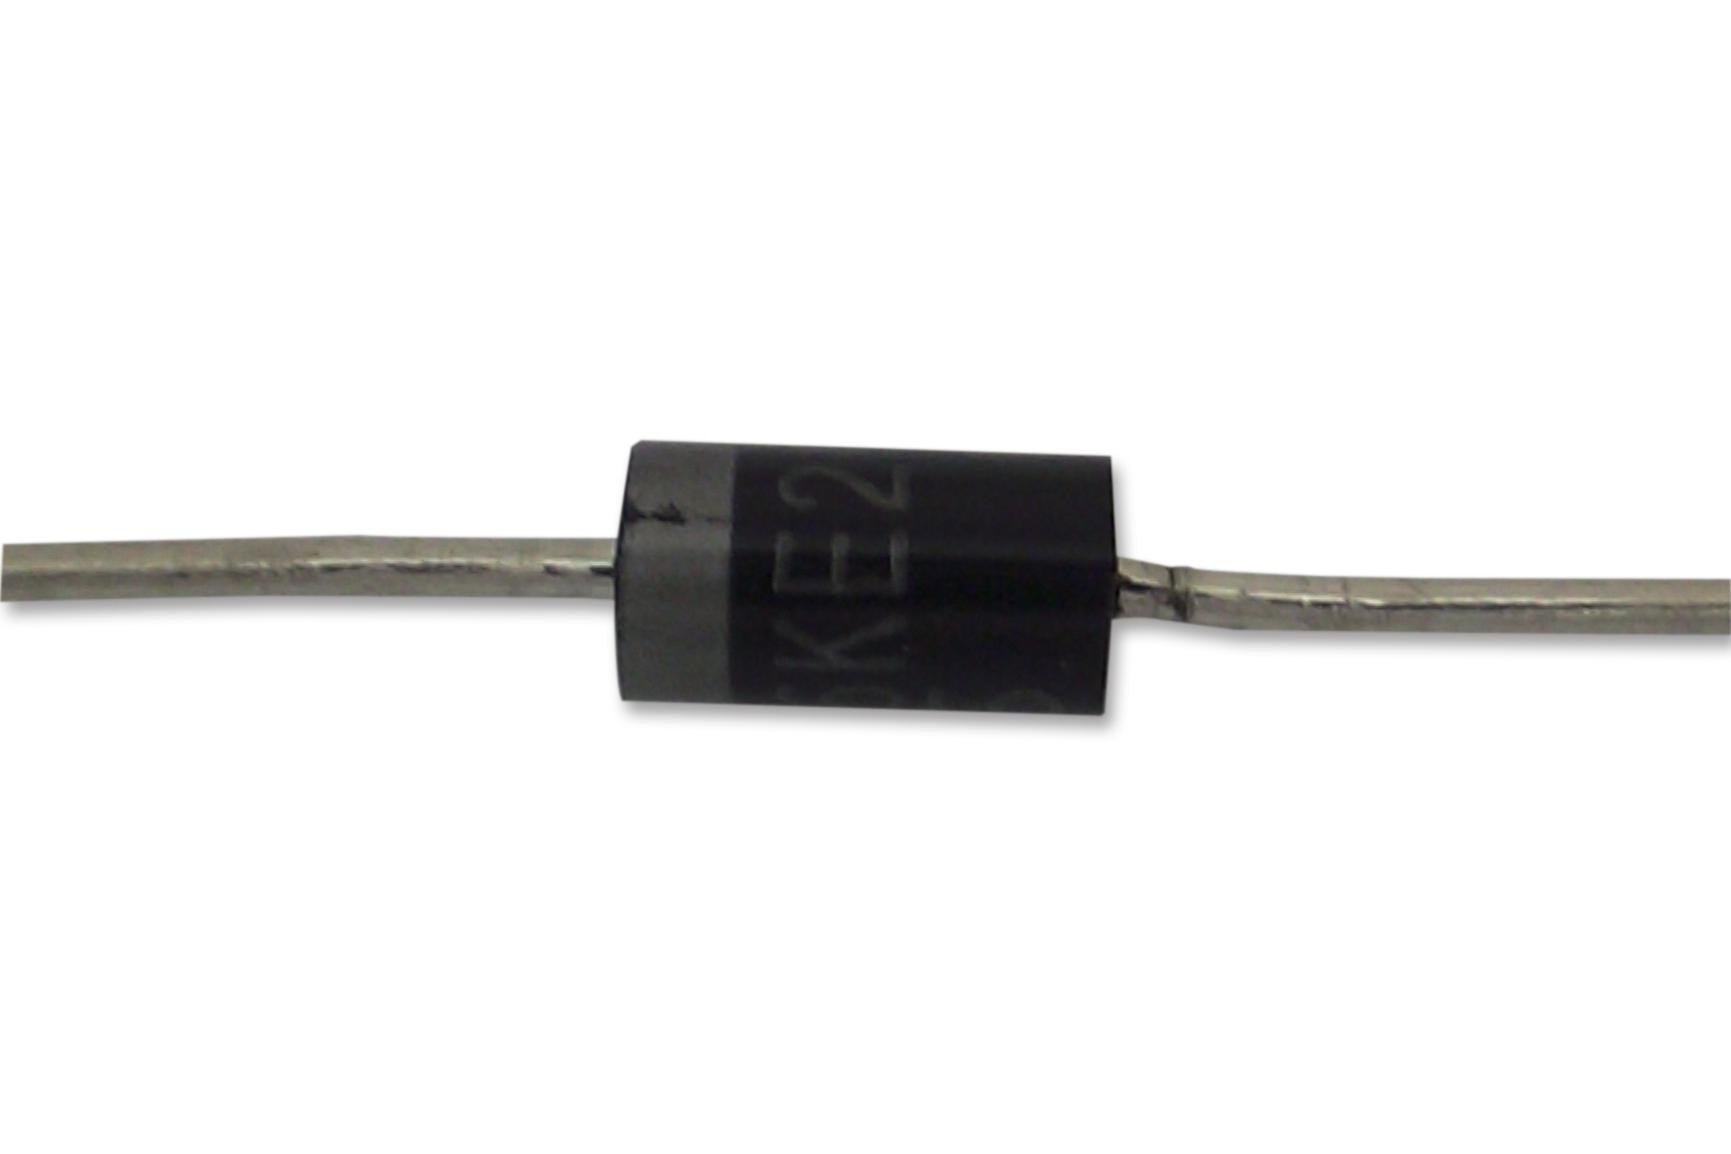 STTH208. DIODE, FAST, 2A, 800V, DO-204AC-2 STMICROELECTRONICS